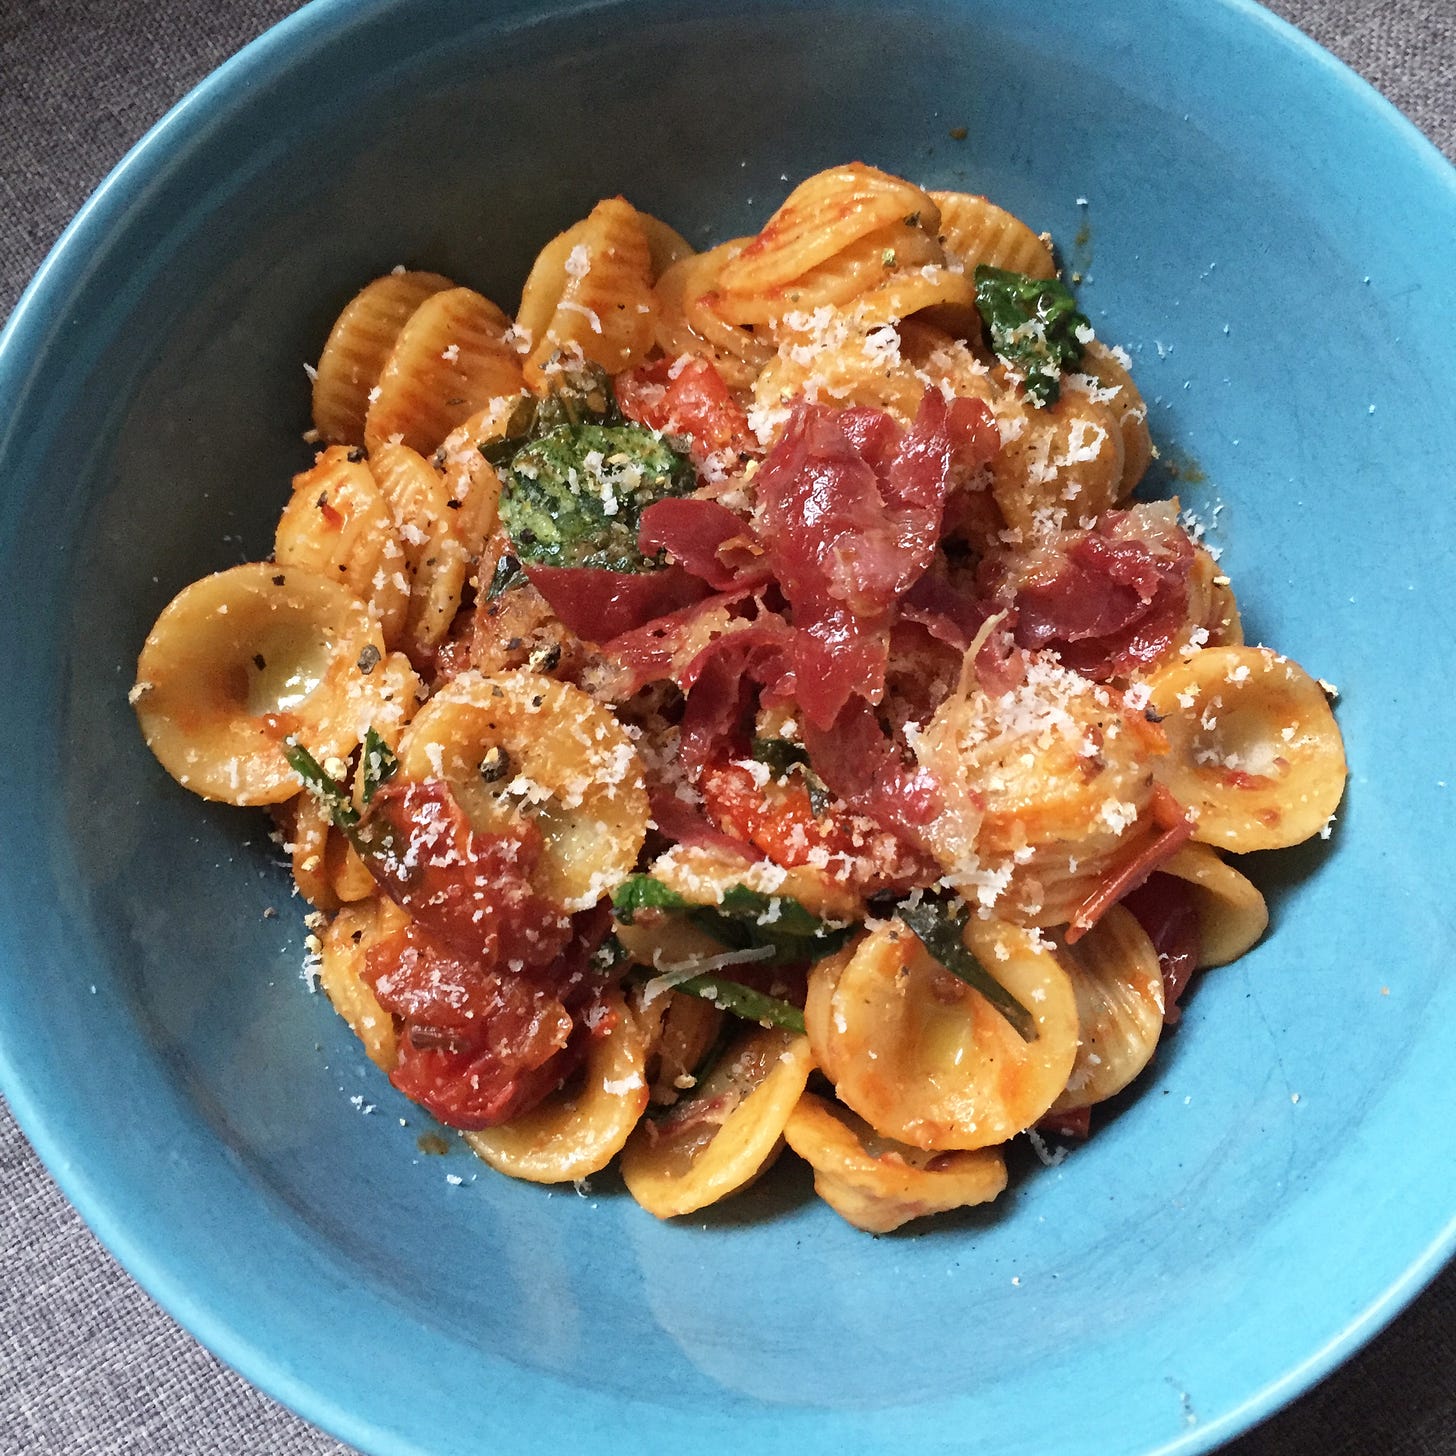 a blue bowl full of orecchiette in tomato sauce, with wilted arugula leaves visible throughout. On top is a dusting of parmesan and crumbles of fried deli meat.